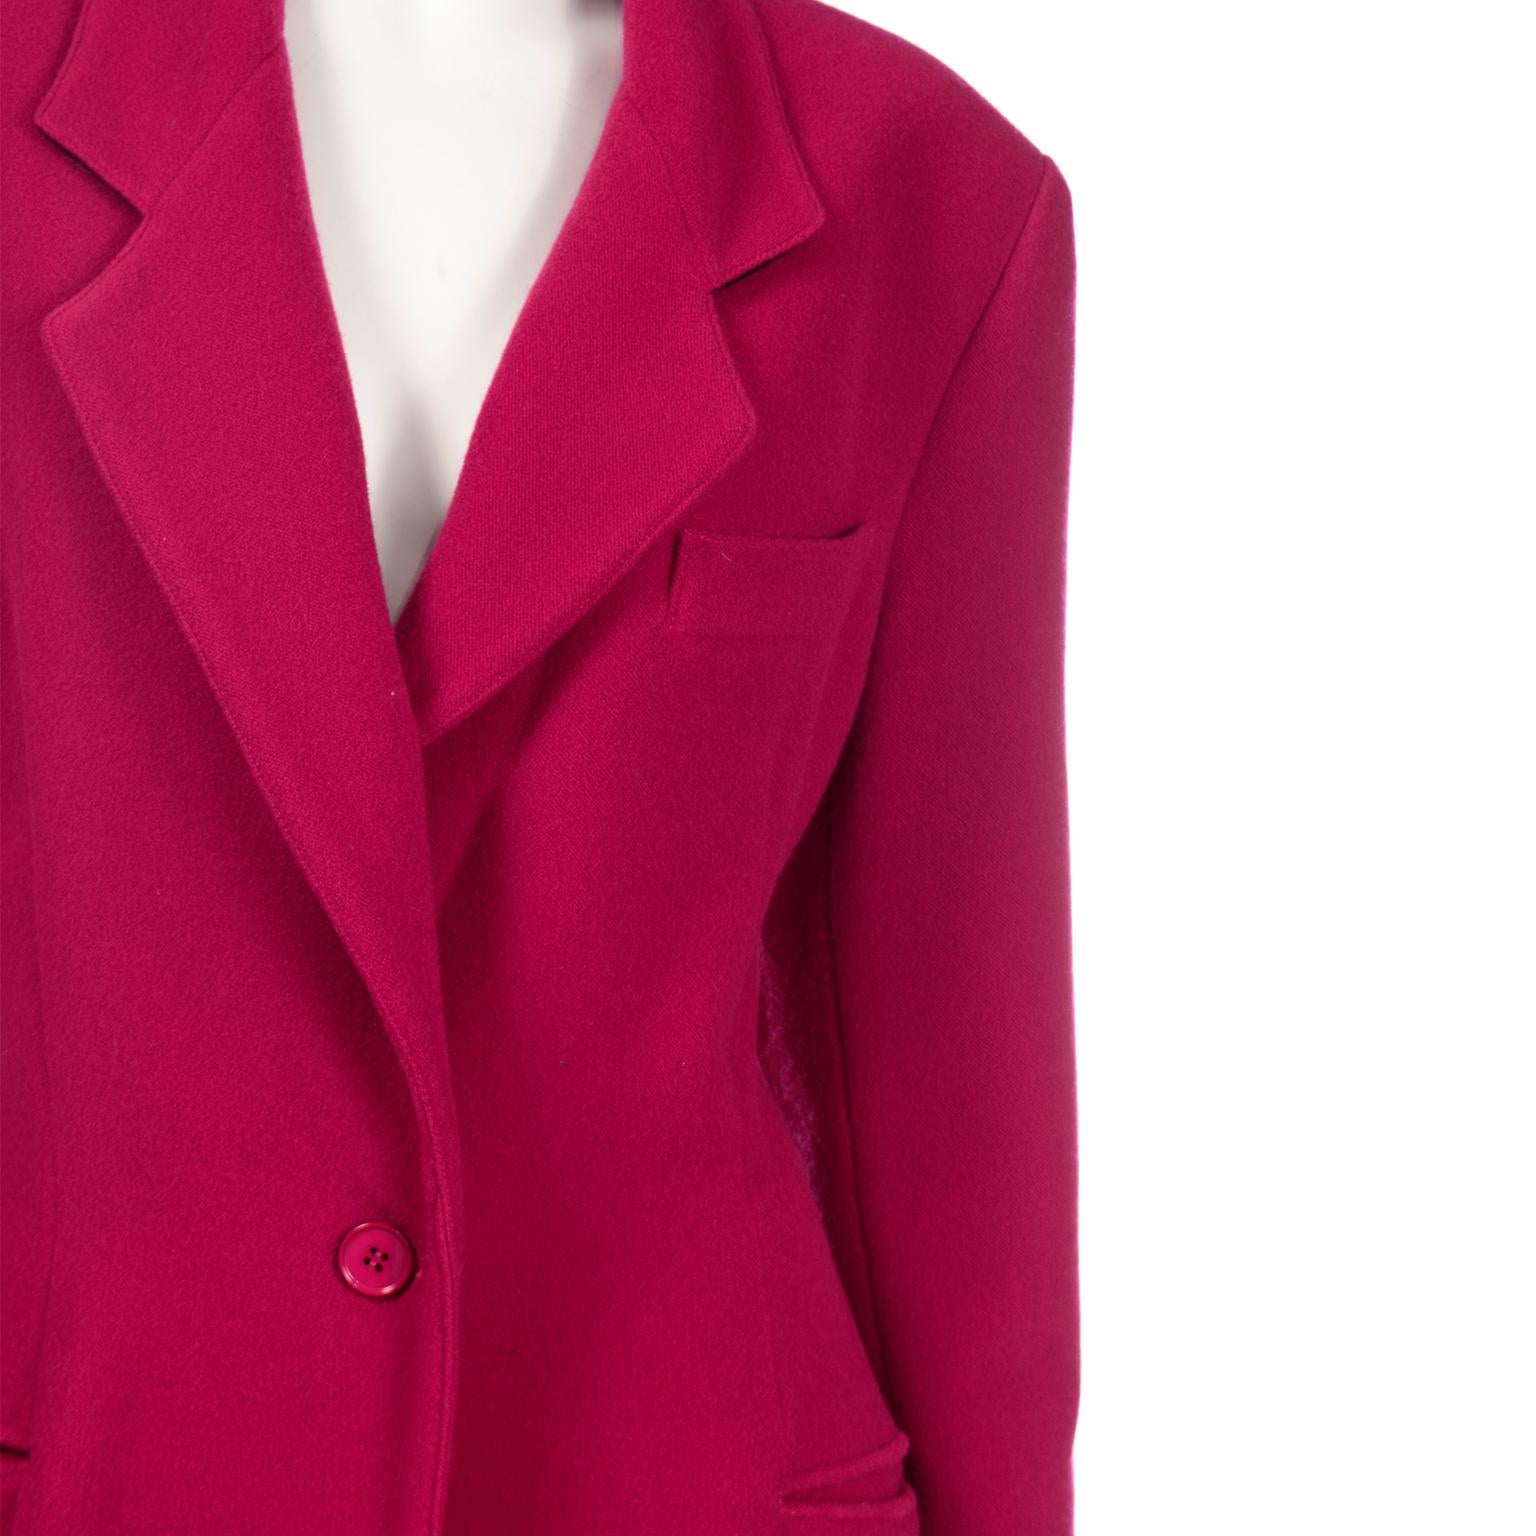 Vintage Gianfranco Ferre Raspberry Red Wool Cashmere Blend Coat In Excellent Condition For Sale In Portland, OR